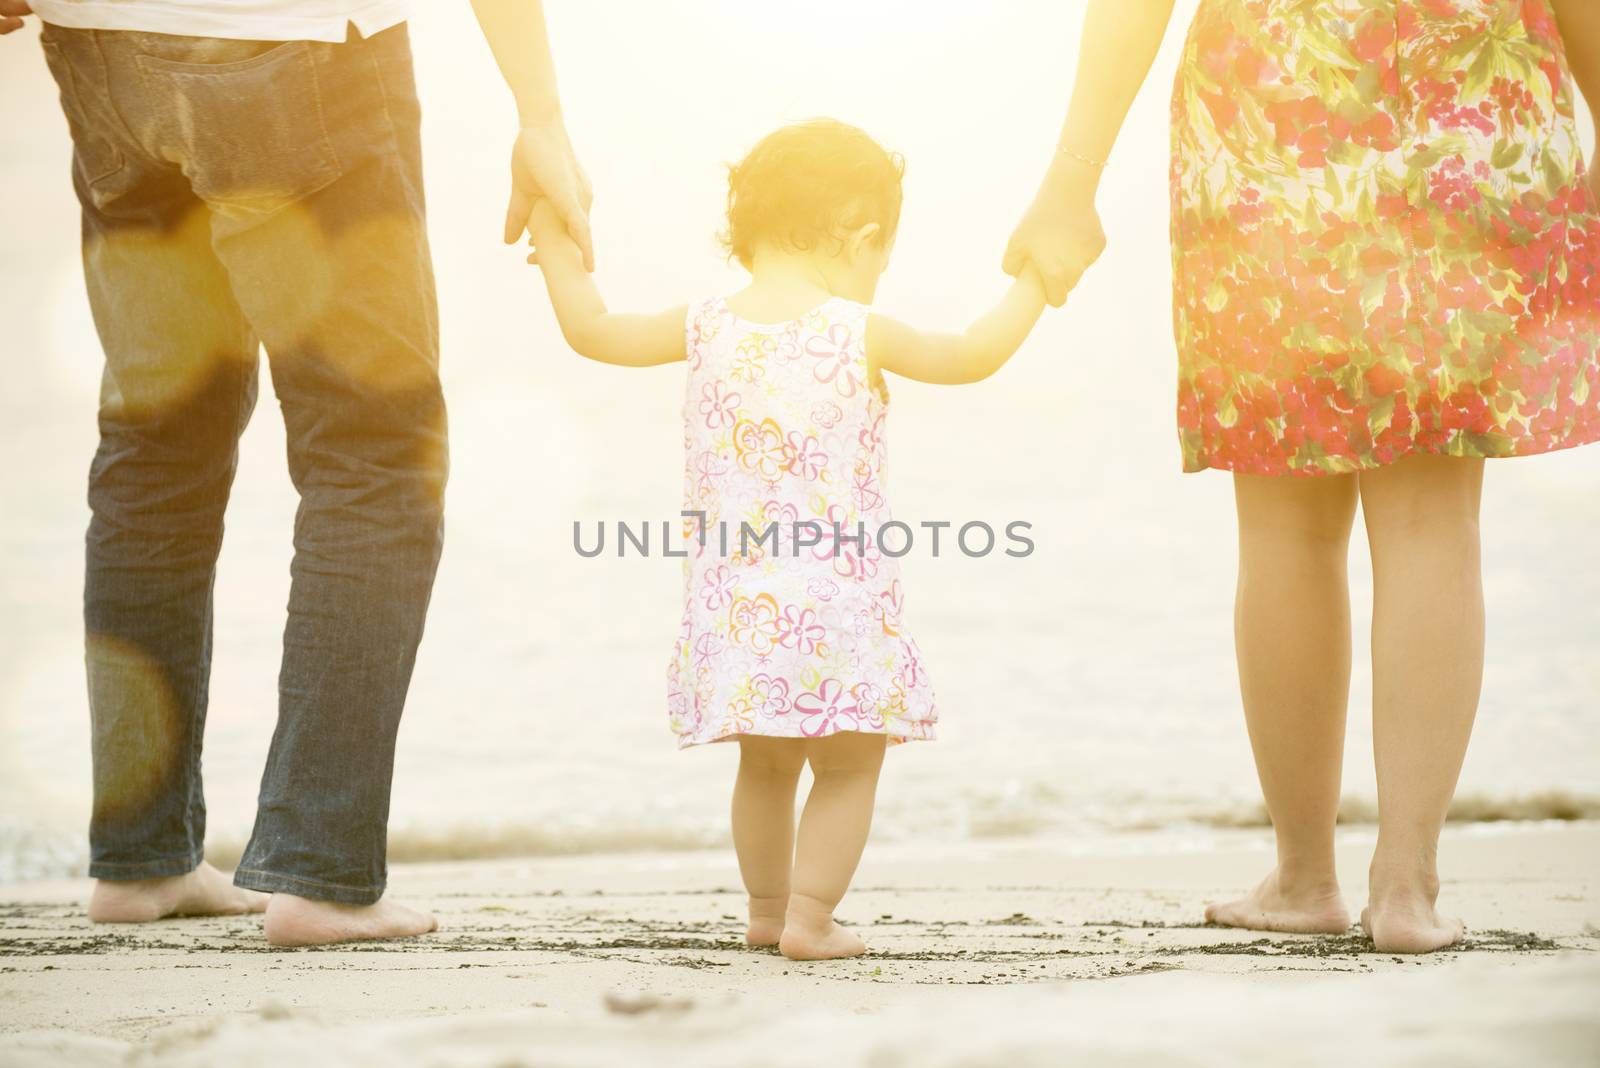 Happy Asian family outdoor activity, holding hands together walking on sand seaside in sunset during vacations.